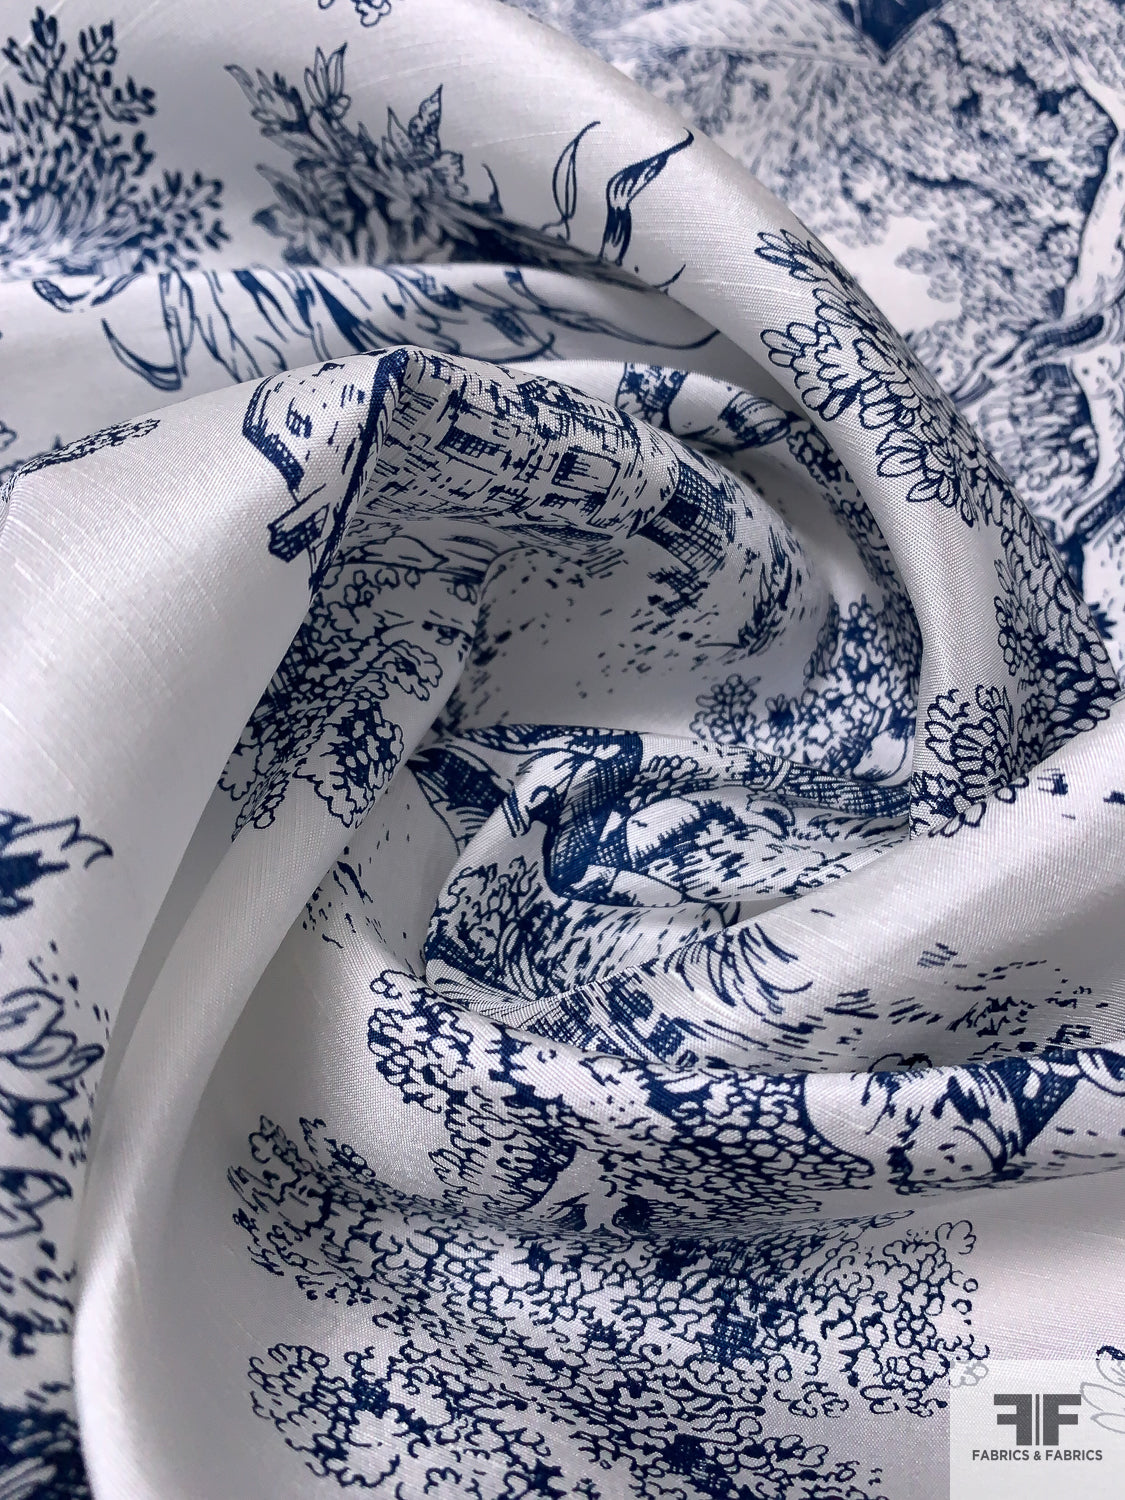 Buy wholesale Linen By The Yard or Meter, Vintage French Toile de